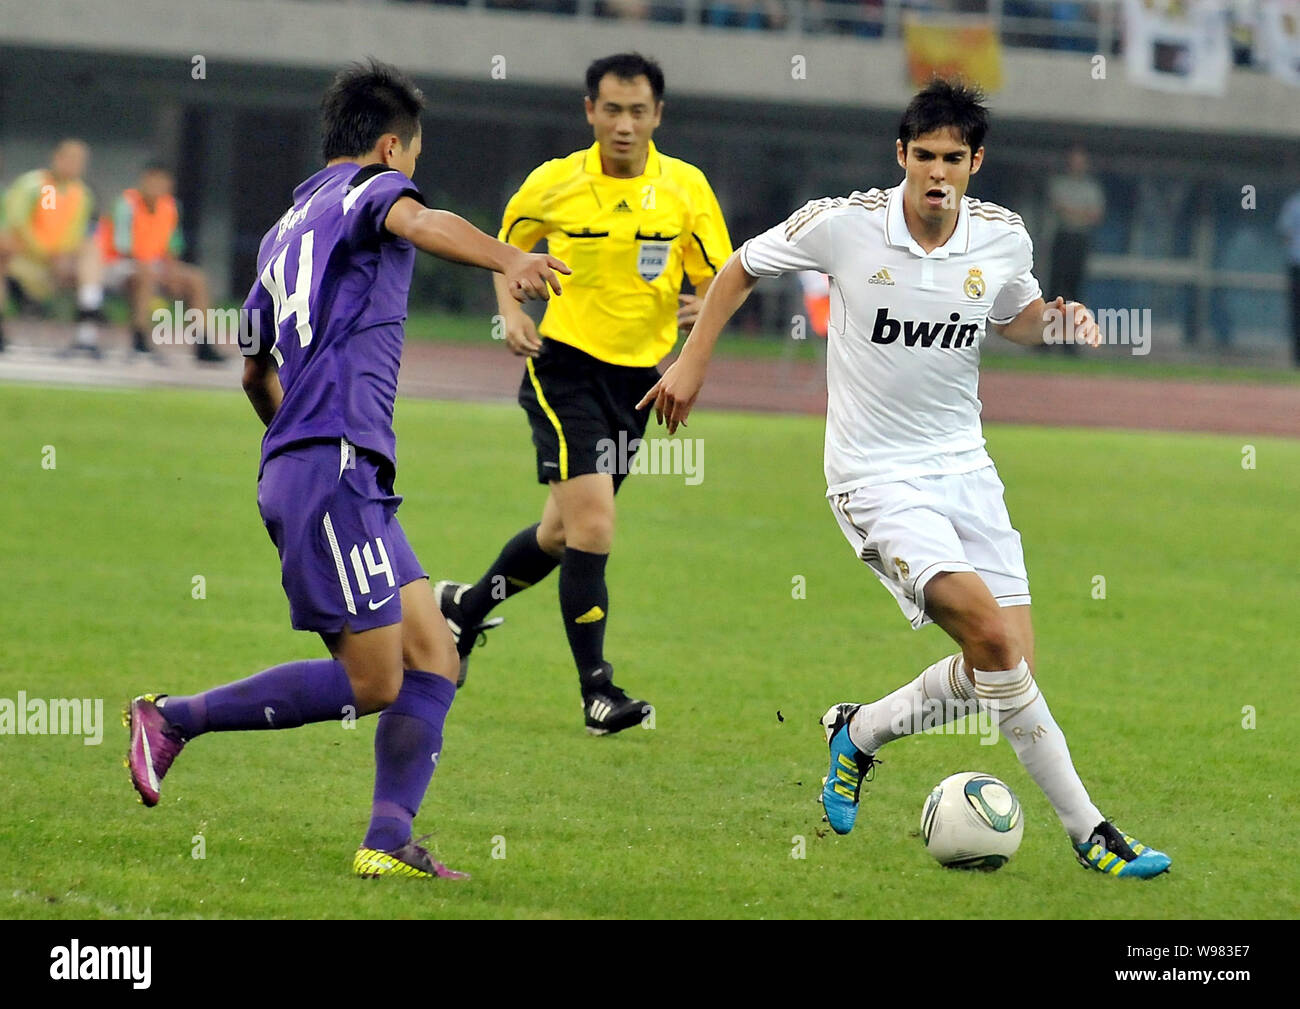 Ricardo Izecson dos Santos Leite, known as Kaka of Real Madrid, right, challenges a football player of Tianjin Teda during a friendly soccer match in Stock Photo